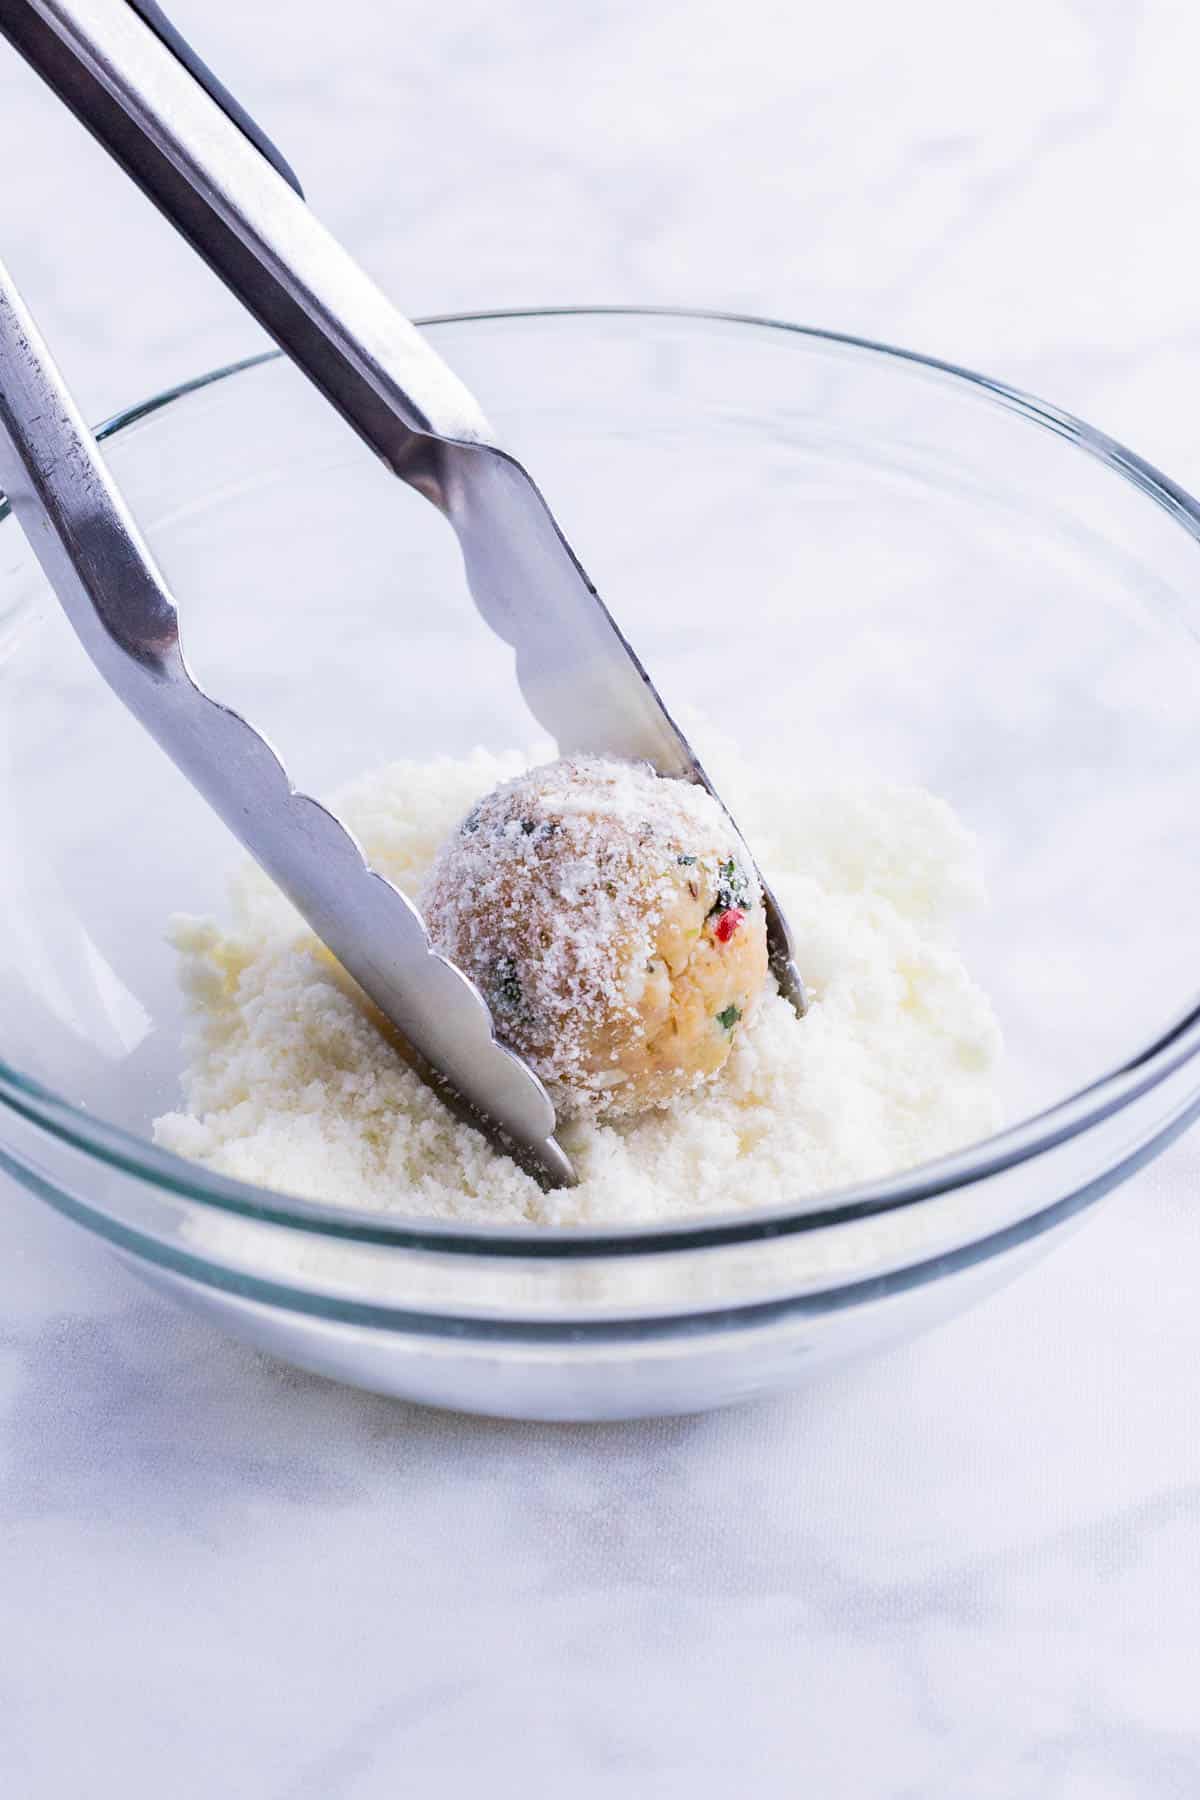 A chicken meatball is rolled in grated Parmesan cheese.